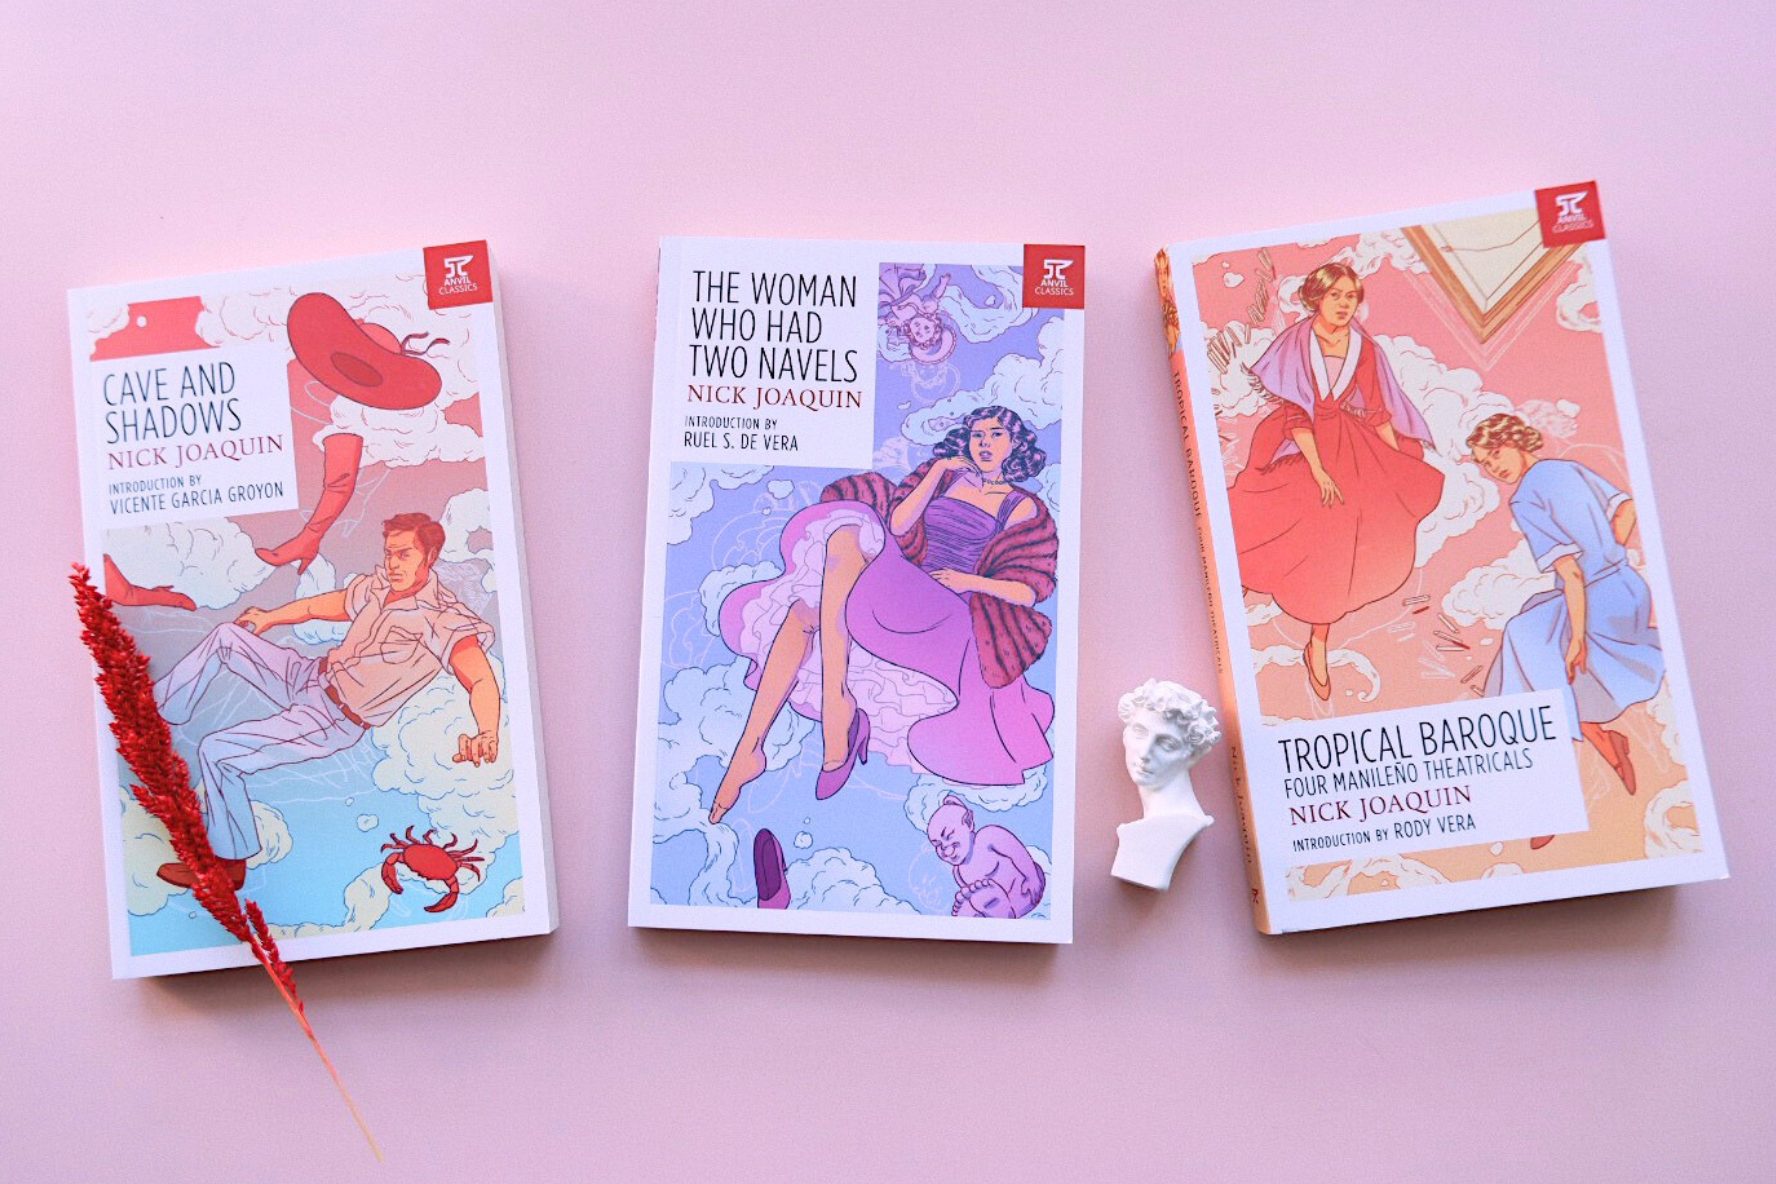 LOOK: These Reprinted Editions of National Artist Nick Joaquin’s Books Are So Gorgeous